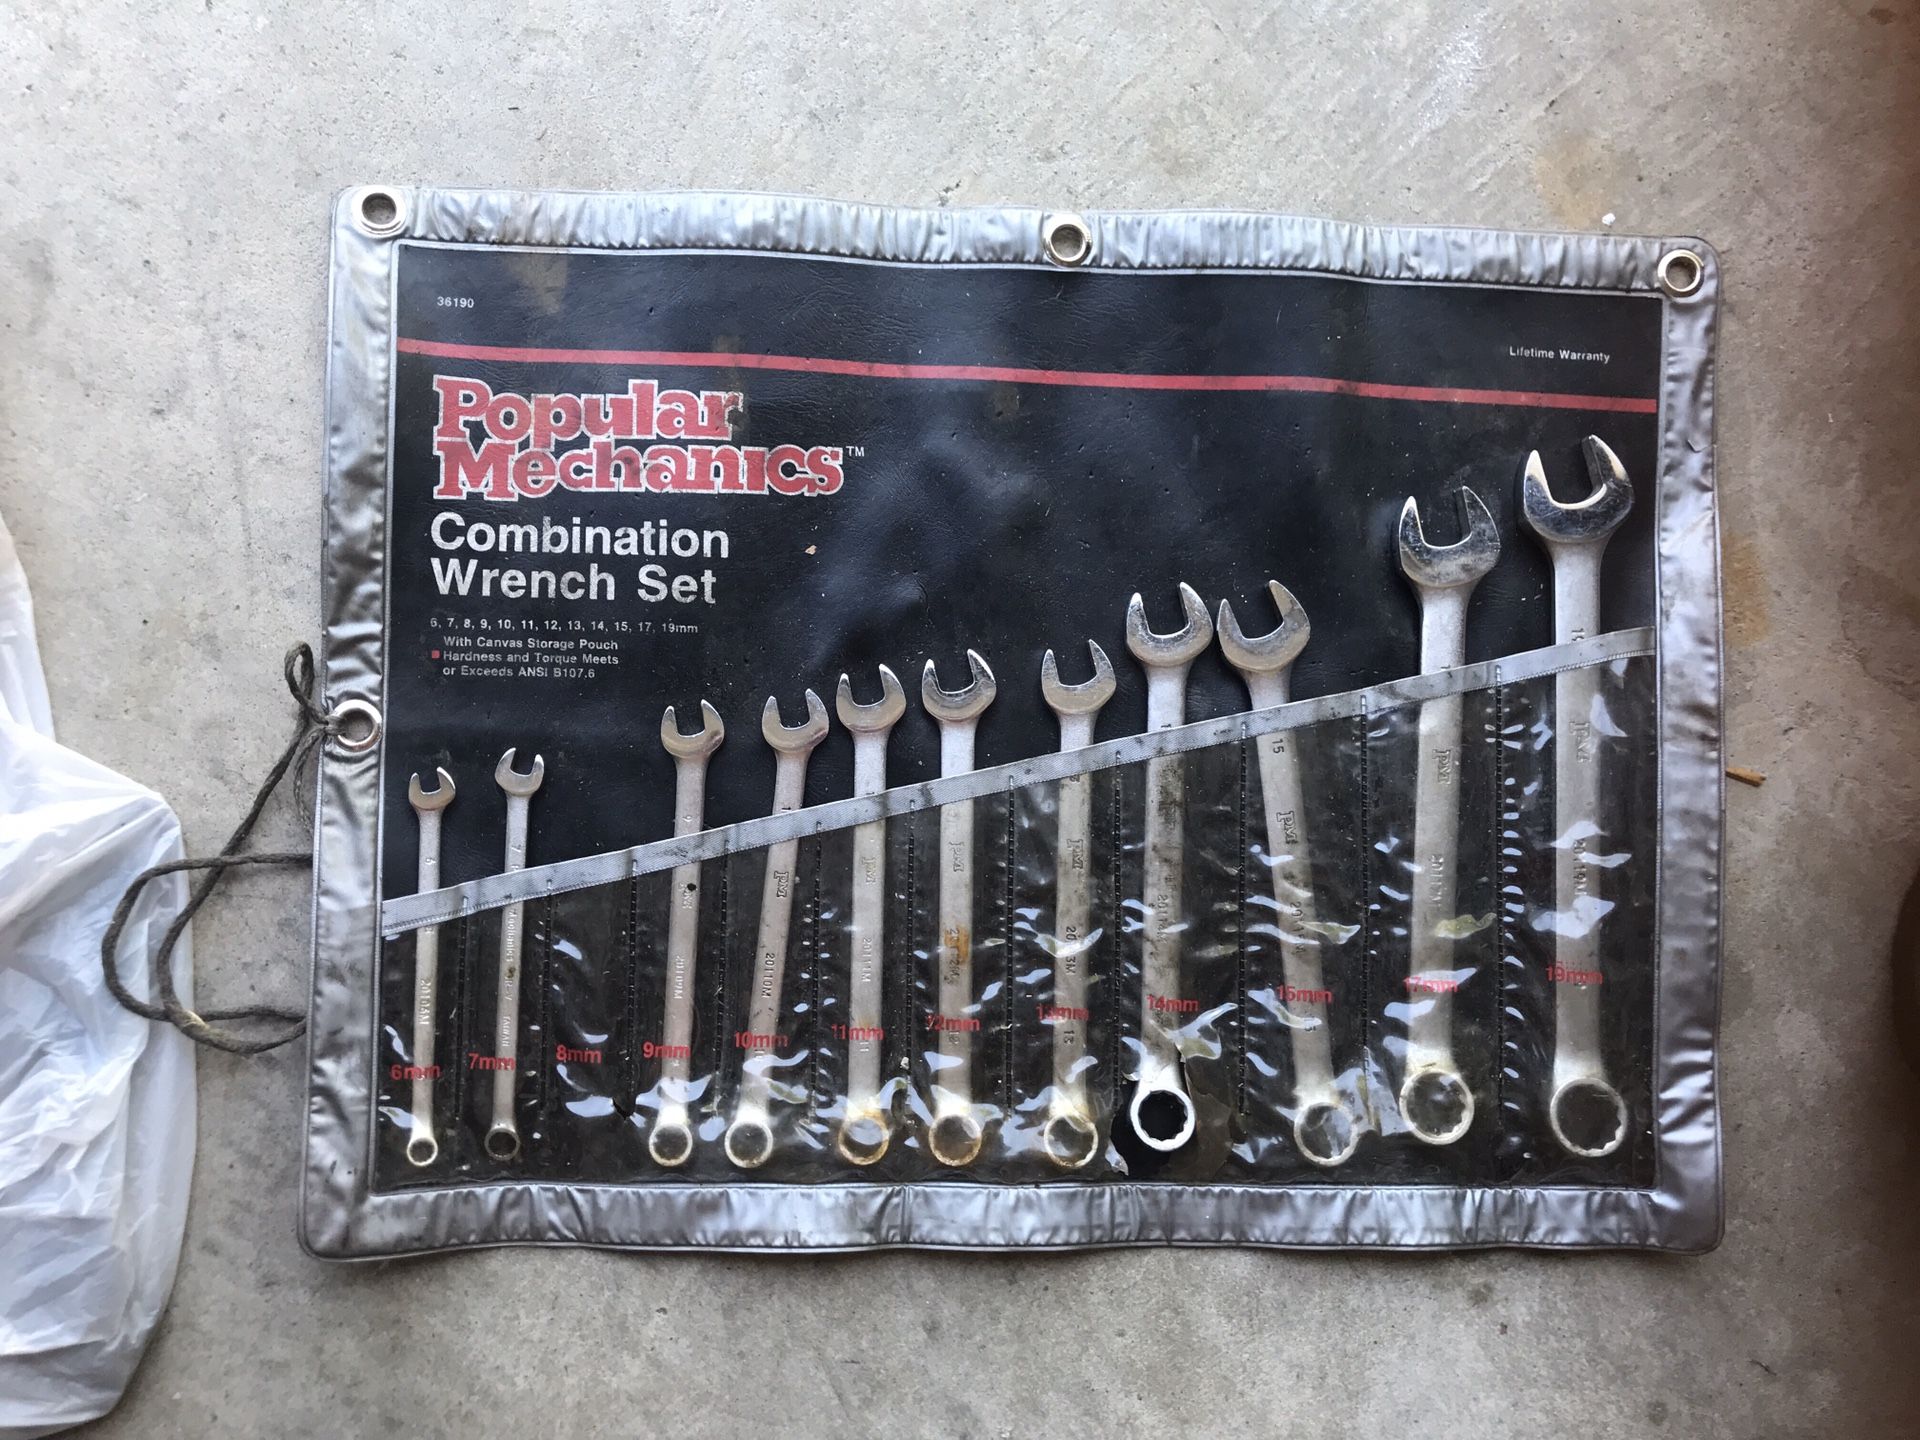 Popular Mechanics Combination Wrench Set - There are 11 total, the 8mm is missing. They are in good condition, but the case is pretty worn. Please se